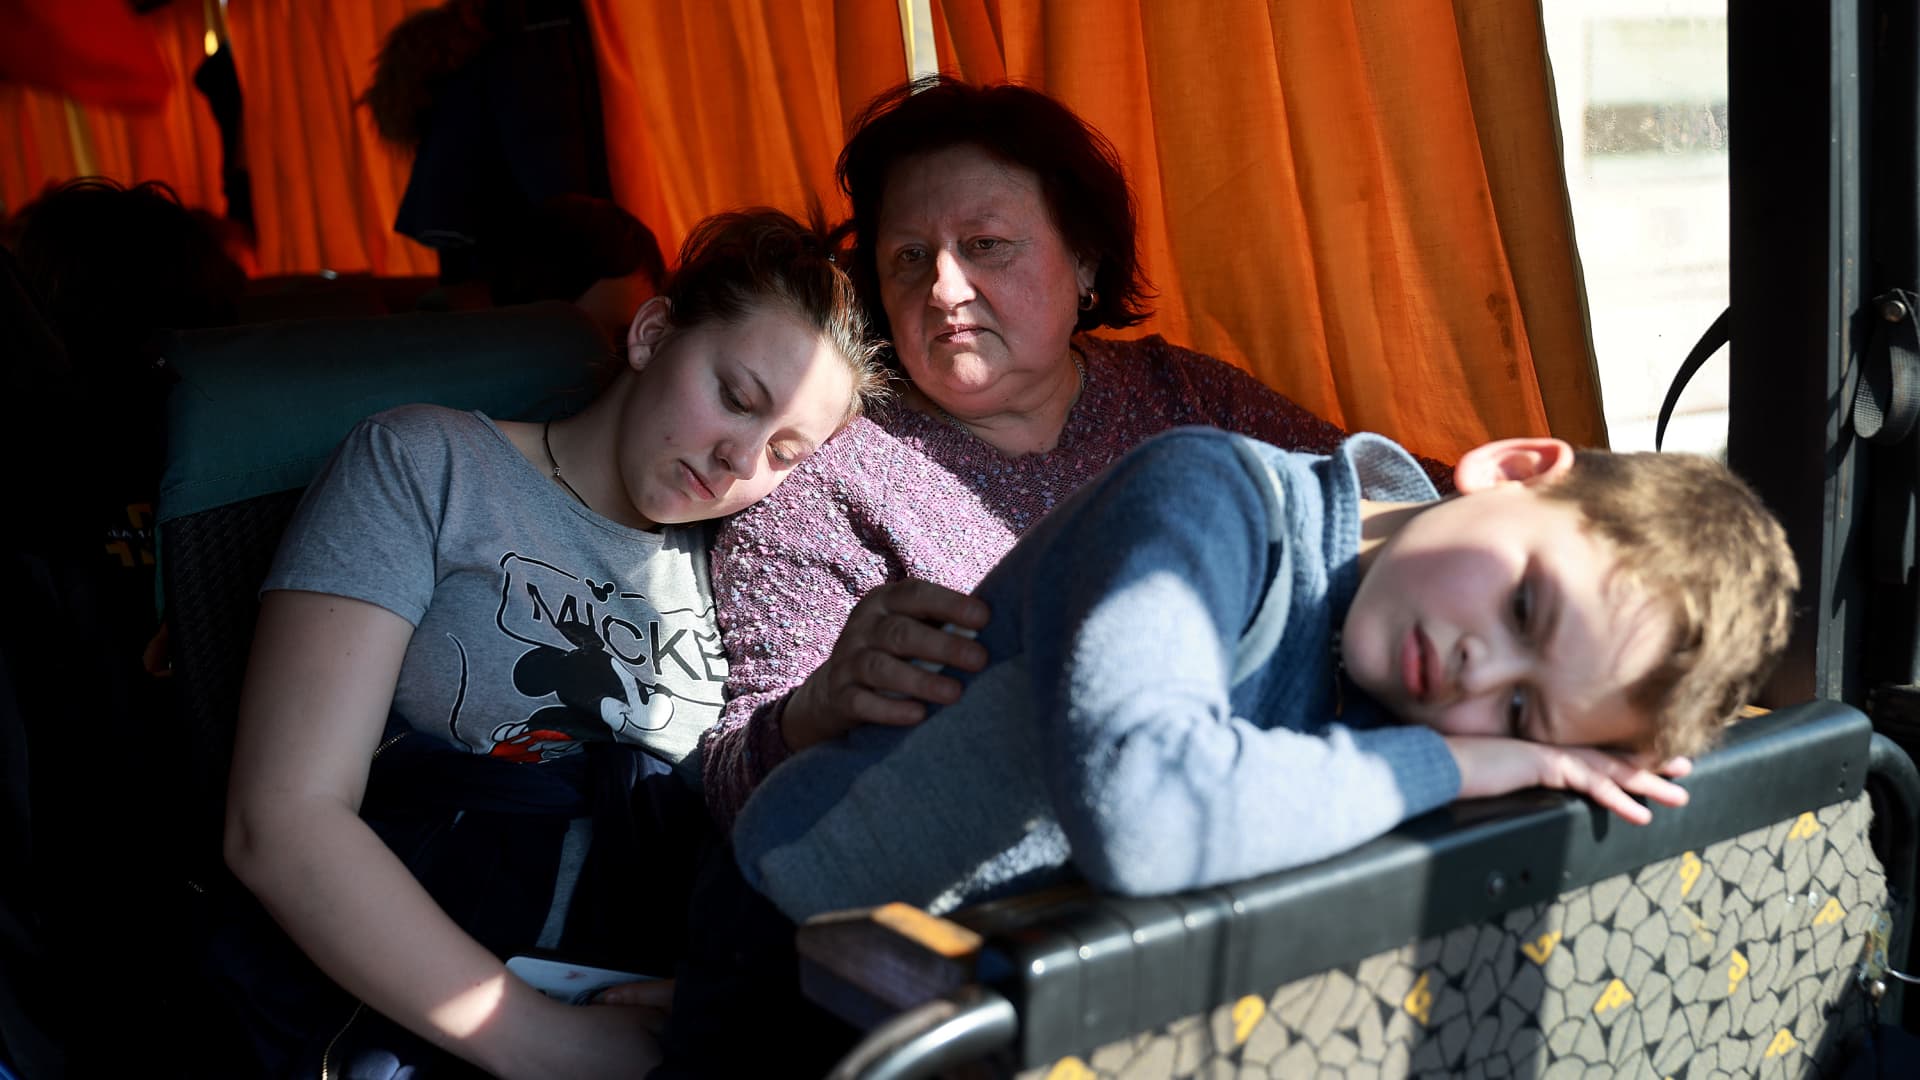 Sywasz Elizabeth, Samarska Ludmyla and Pylypenko Arsenij wait on a bus after arriving safely on a train from the besieged city of Mariupol that is under Russian military attack on March 22, 2022 in Lviv, Ukraine.